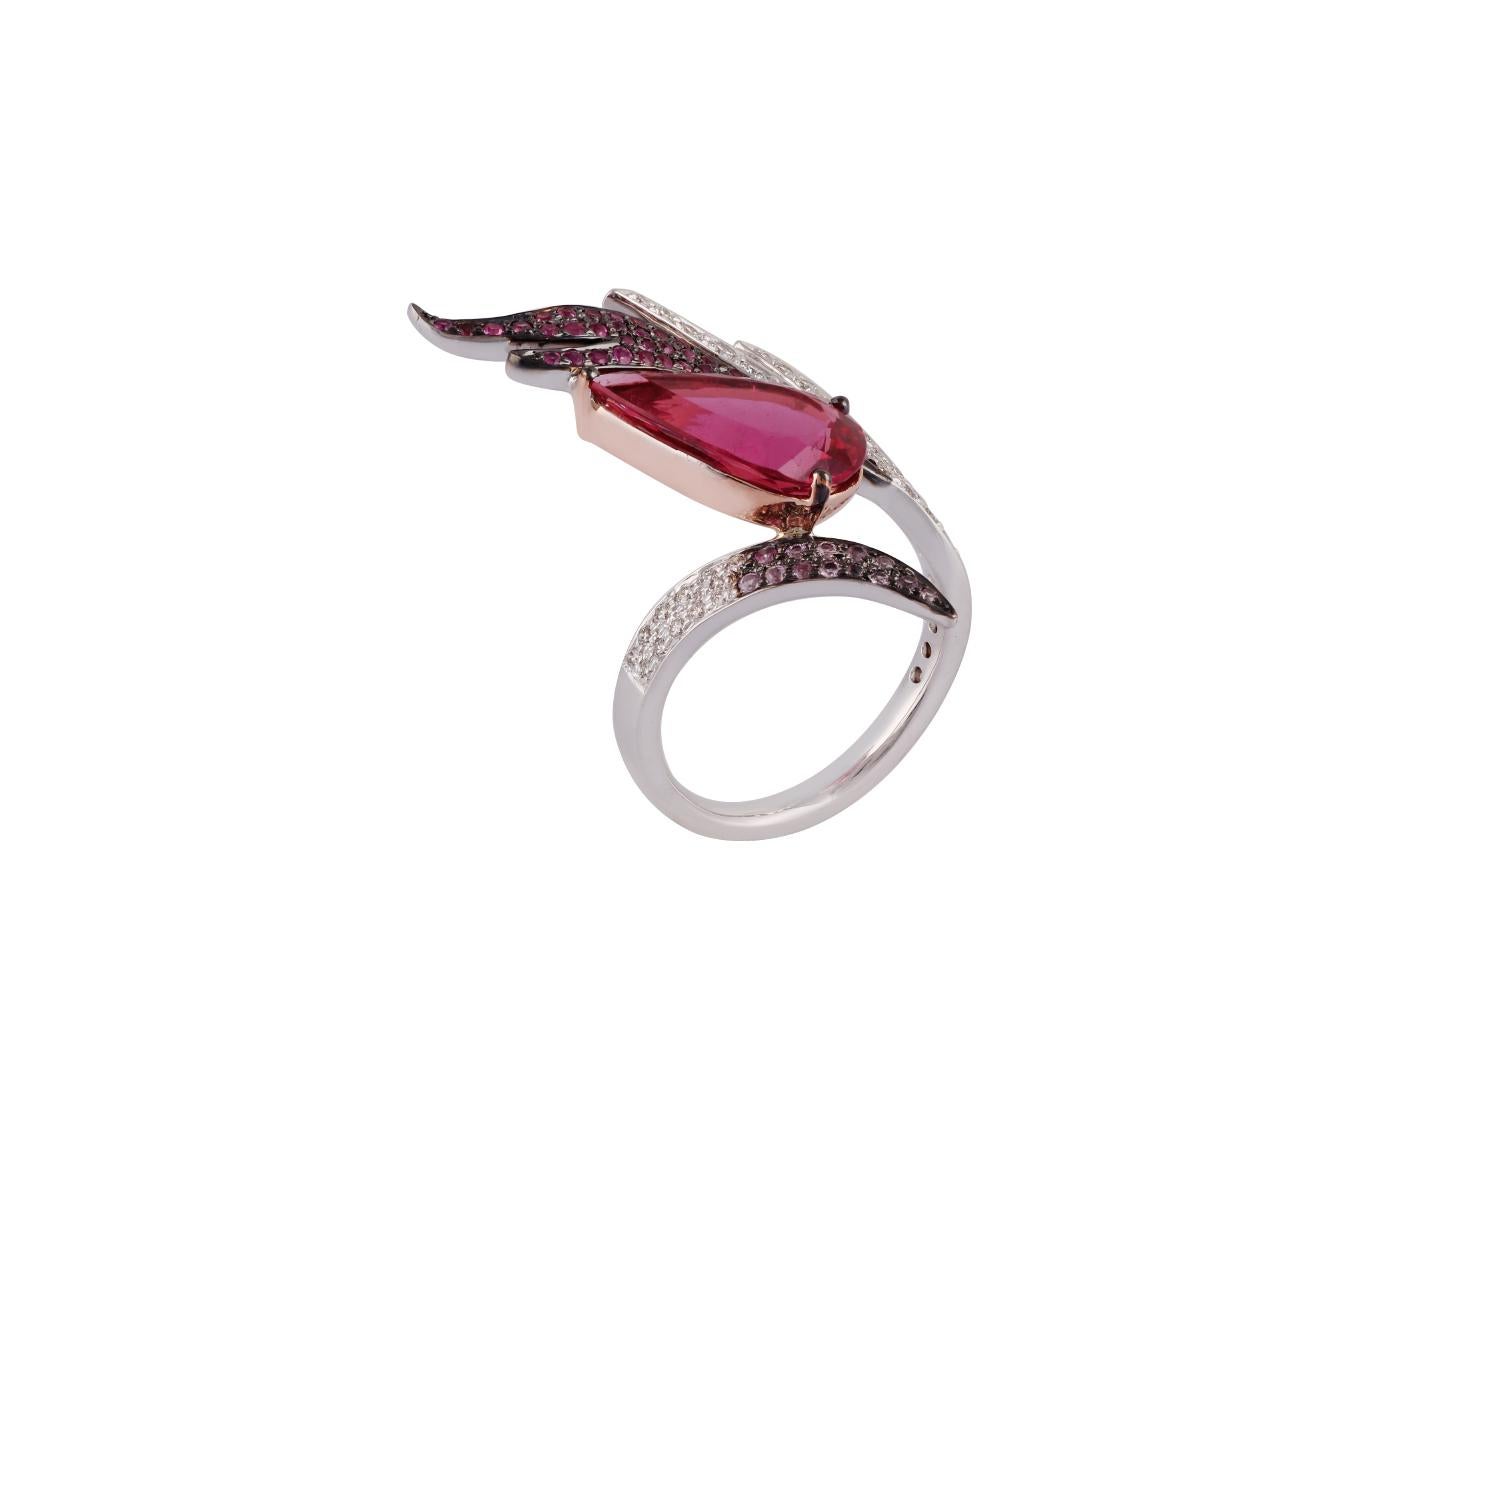 This is a gorgeous rubellite, pink sapphire & diamond ring features pear-shaped rubellite 1 piece weight 4.10 carat, round-shaped pink sapphires 48 pieces weight 0.40 carat with round brilliant cut diamonds 44 pieces weight 0.54 carat this entire